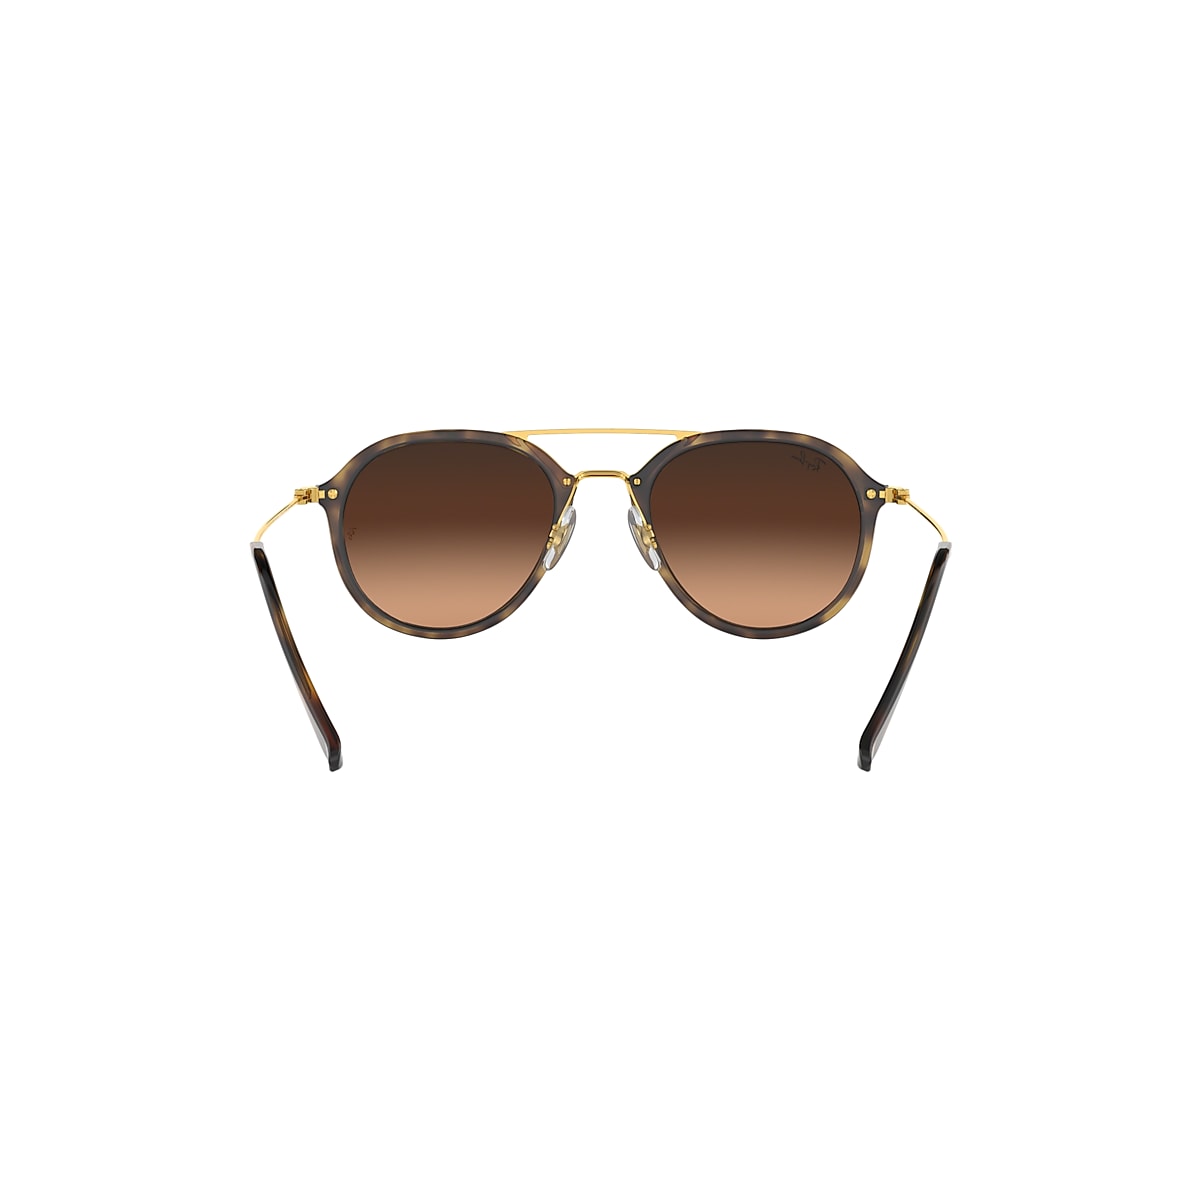 RB4253 Sunglasses in Light Havana and Pink/Brown - Ray-Ban